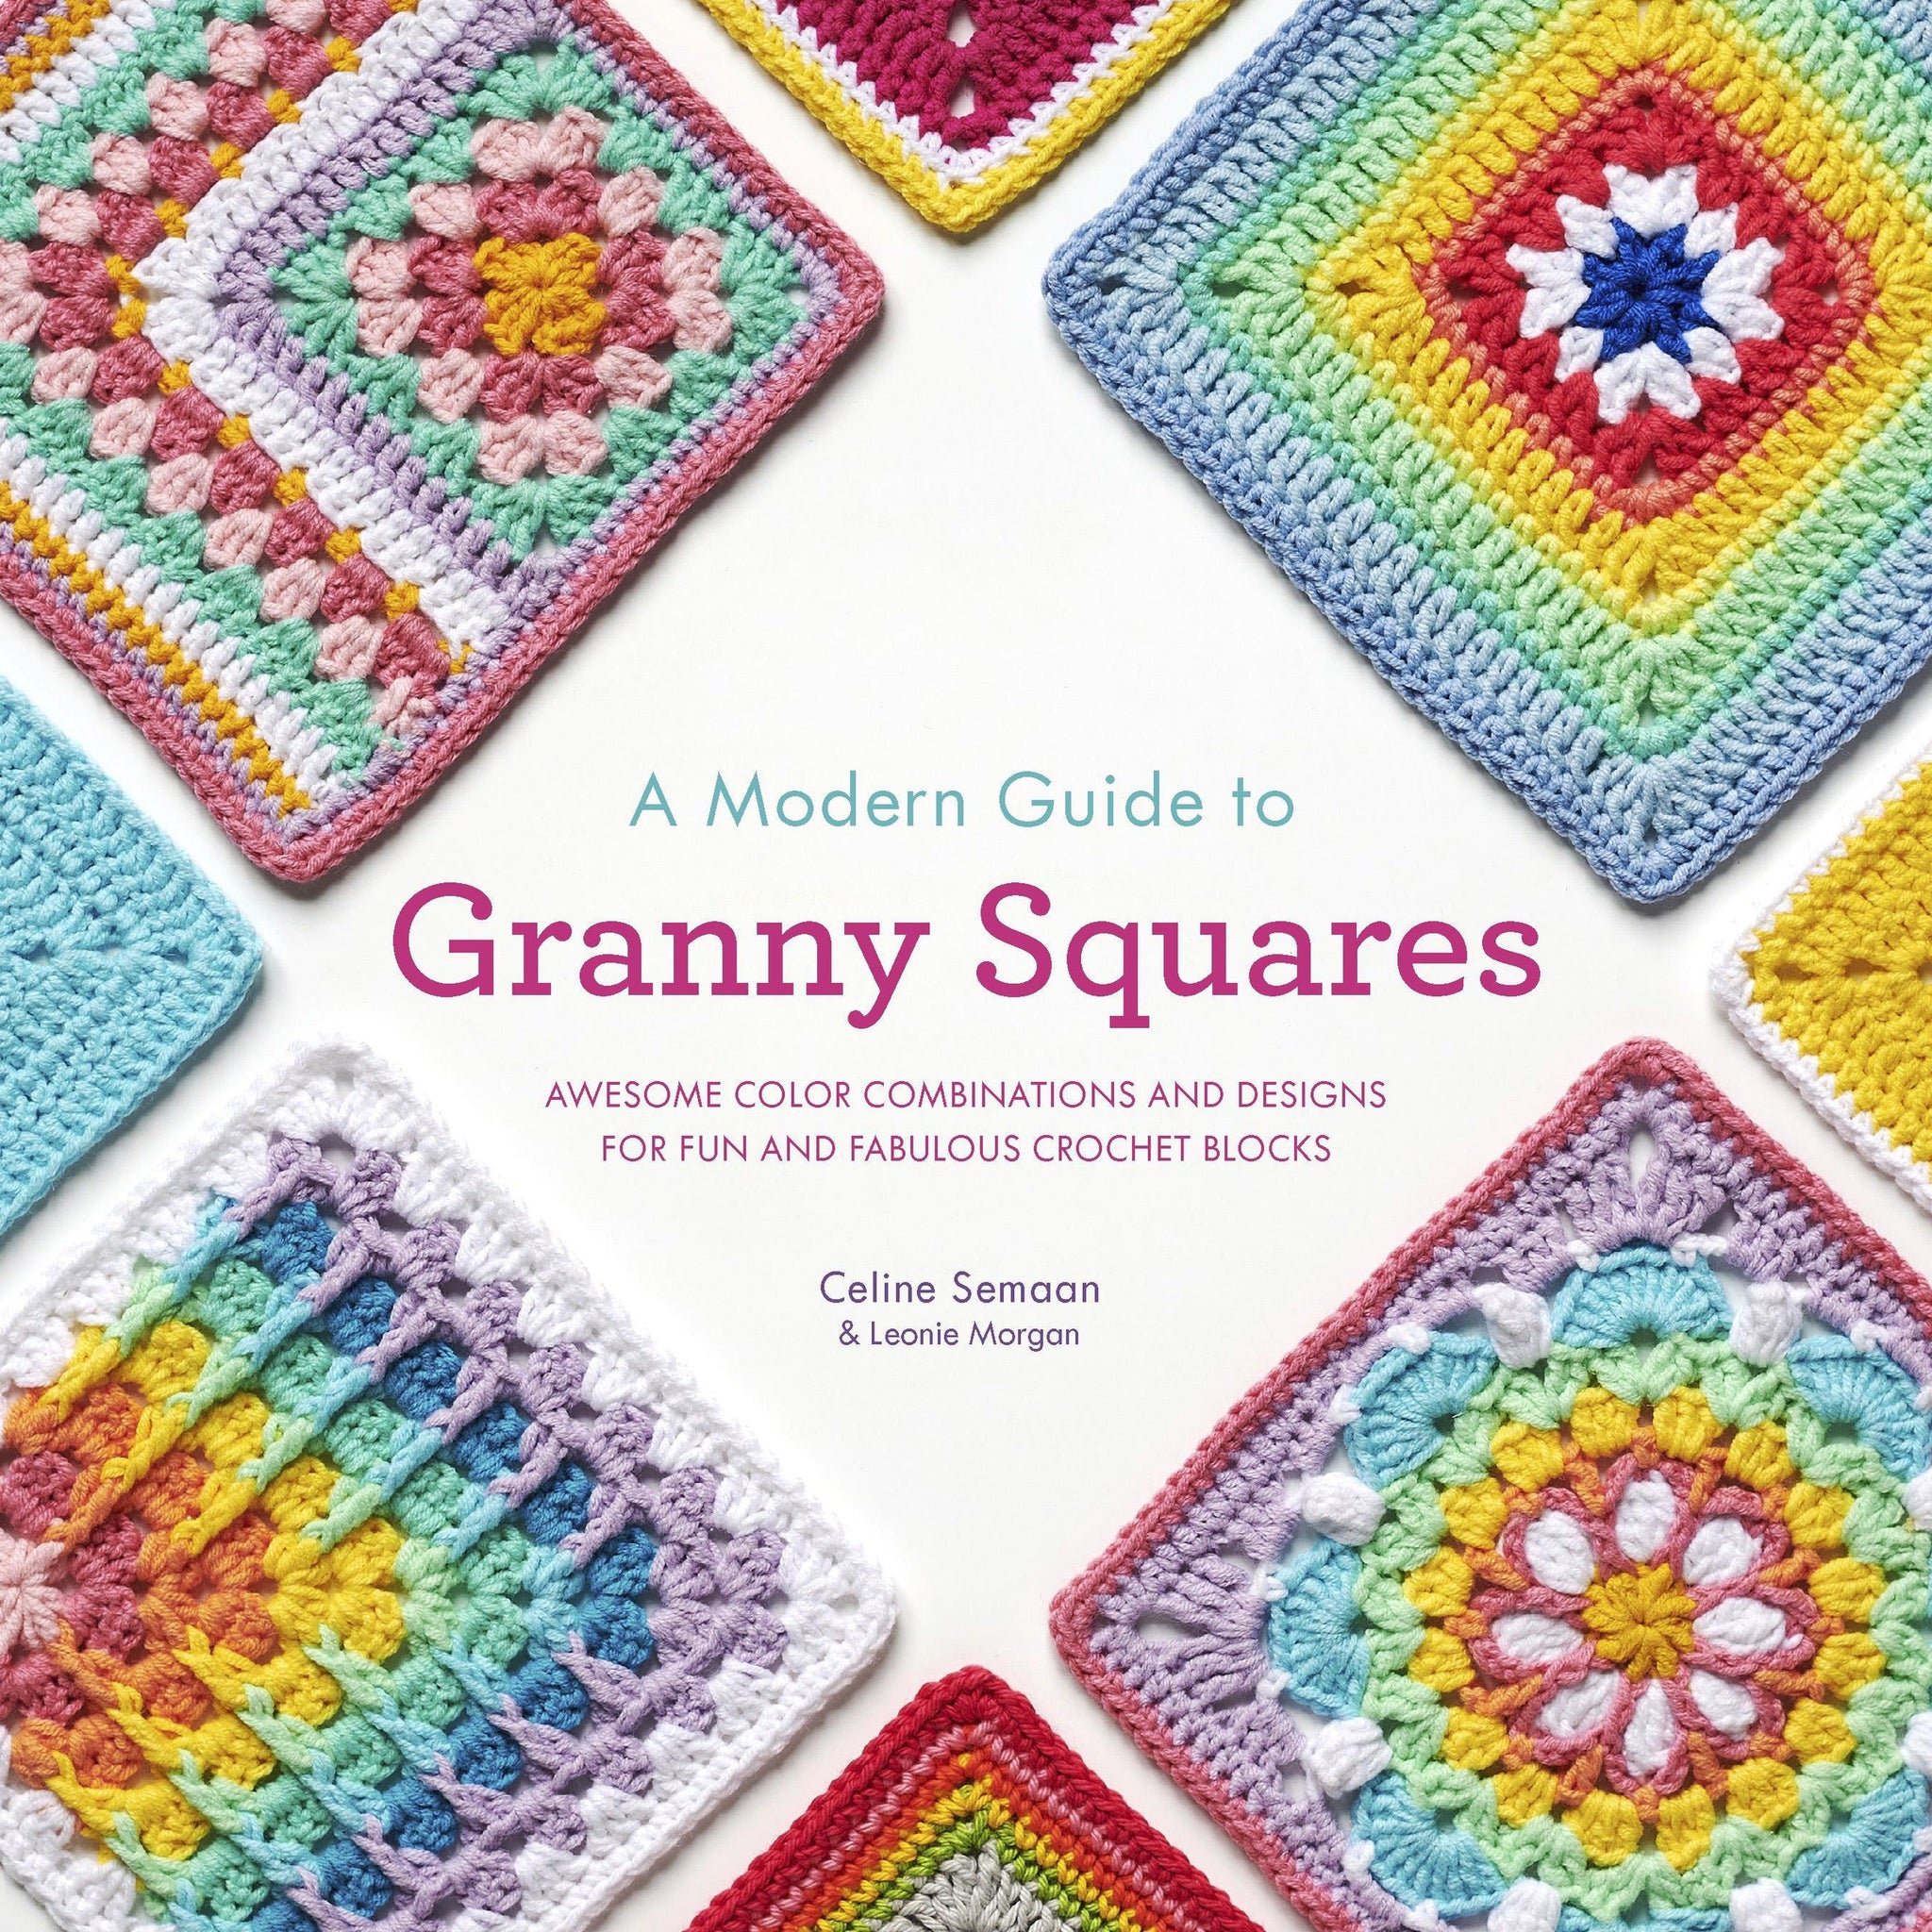 Interweave-A Modern Guide to Granny Squares-book-gather here online